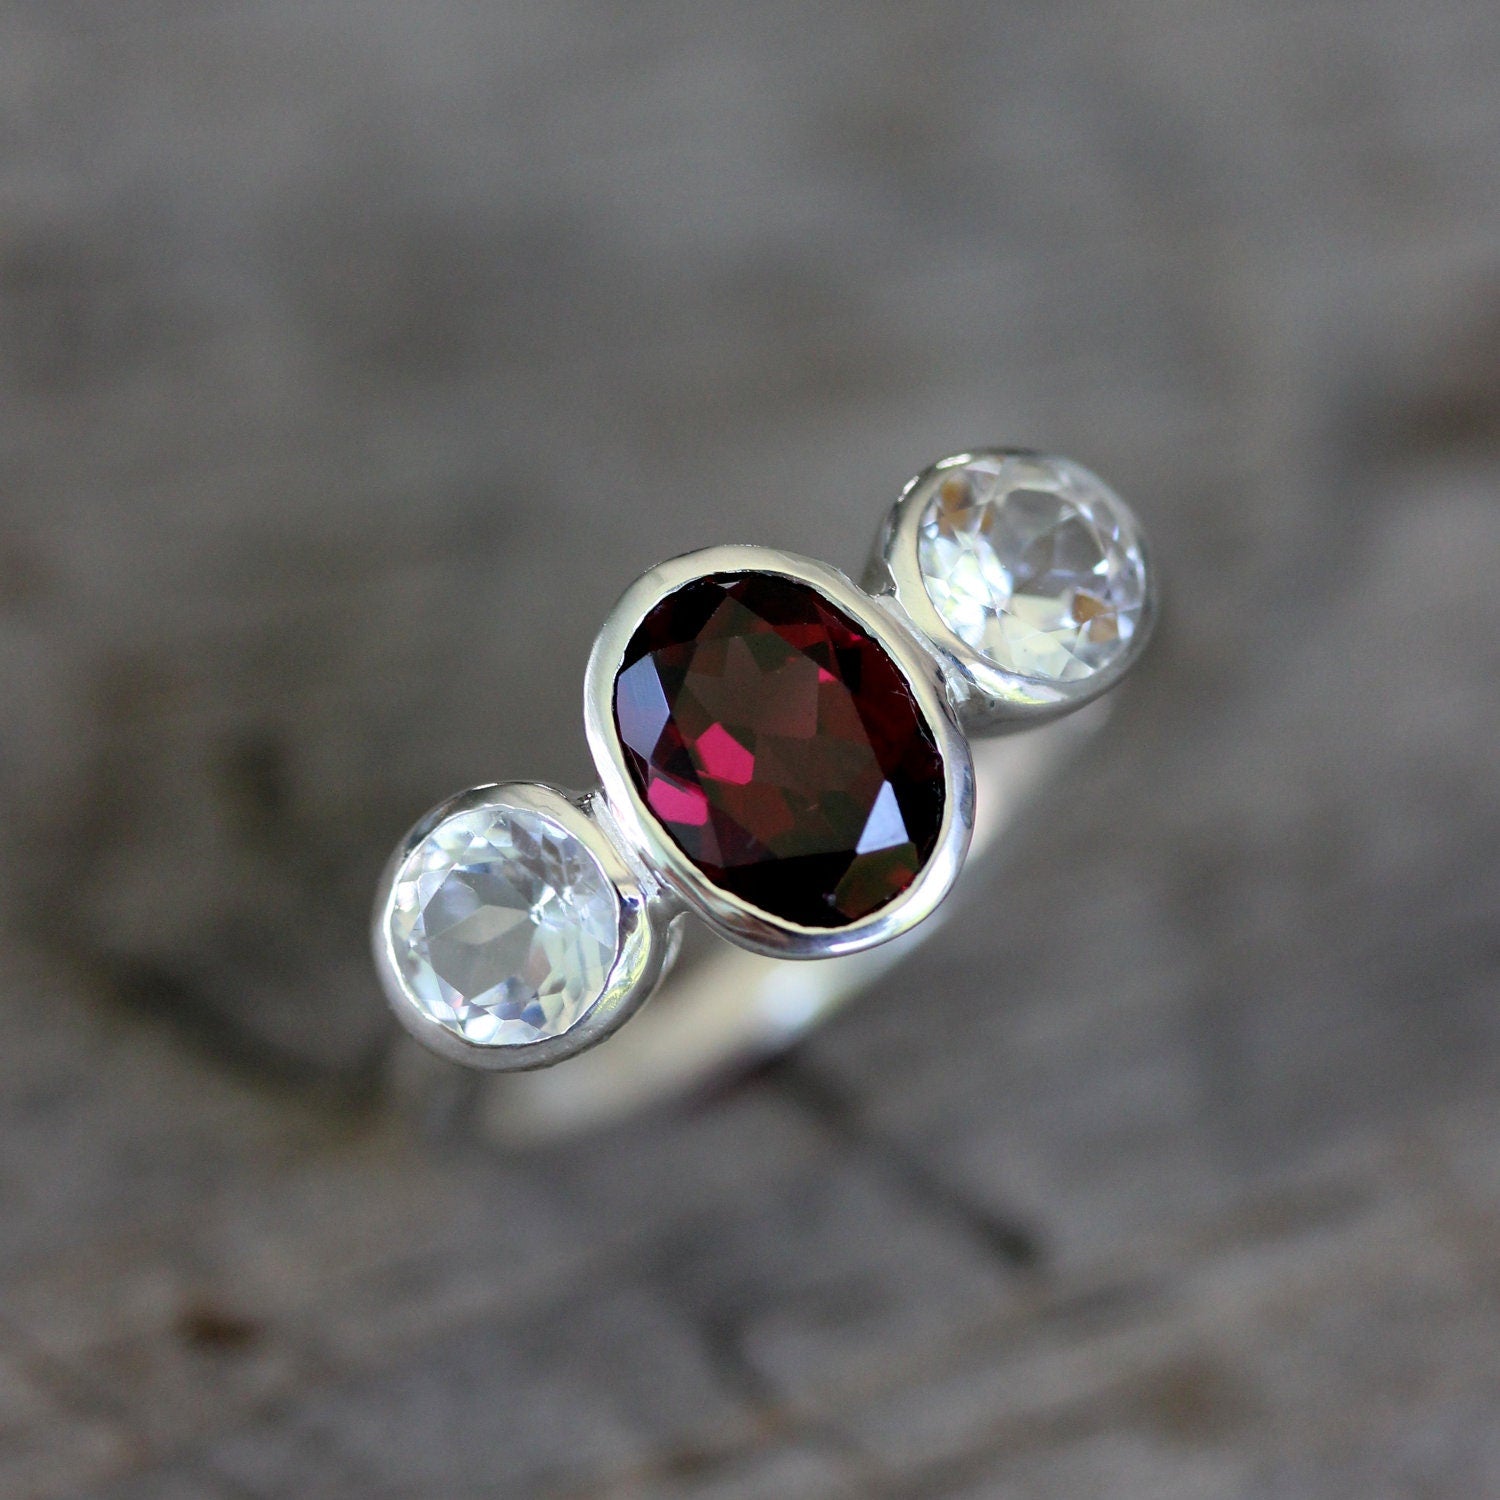 Handmade Pink Garnet Ring adorned with a garnet stone and white topaz by Cassin Jewelry.